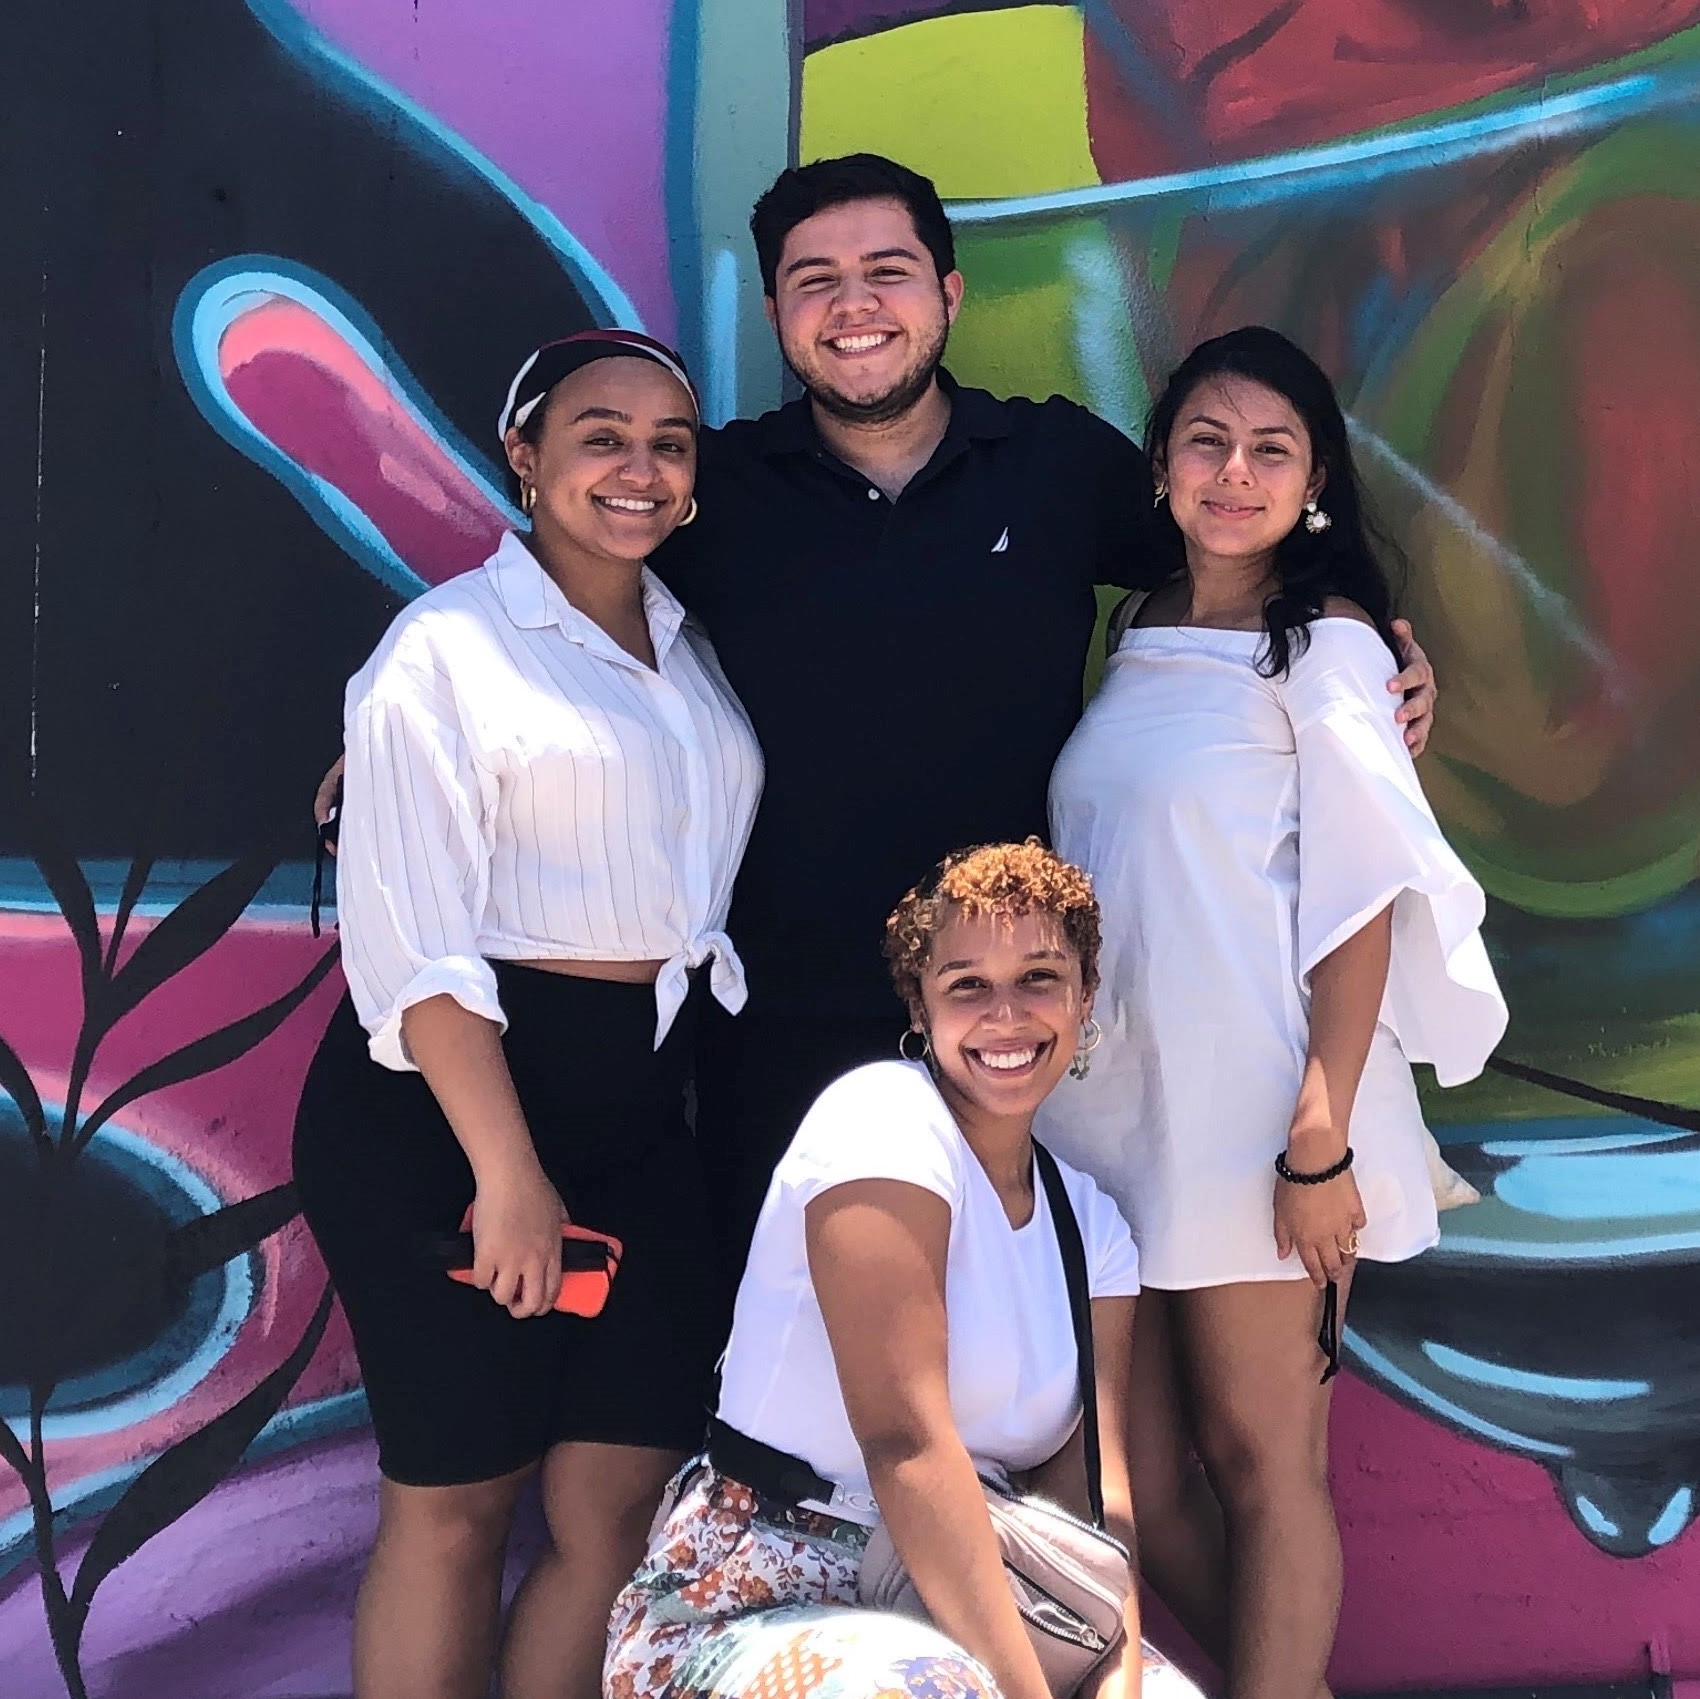 Four students against a colorful wall in Puerto Rico